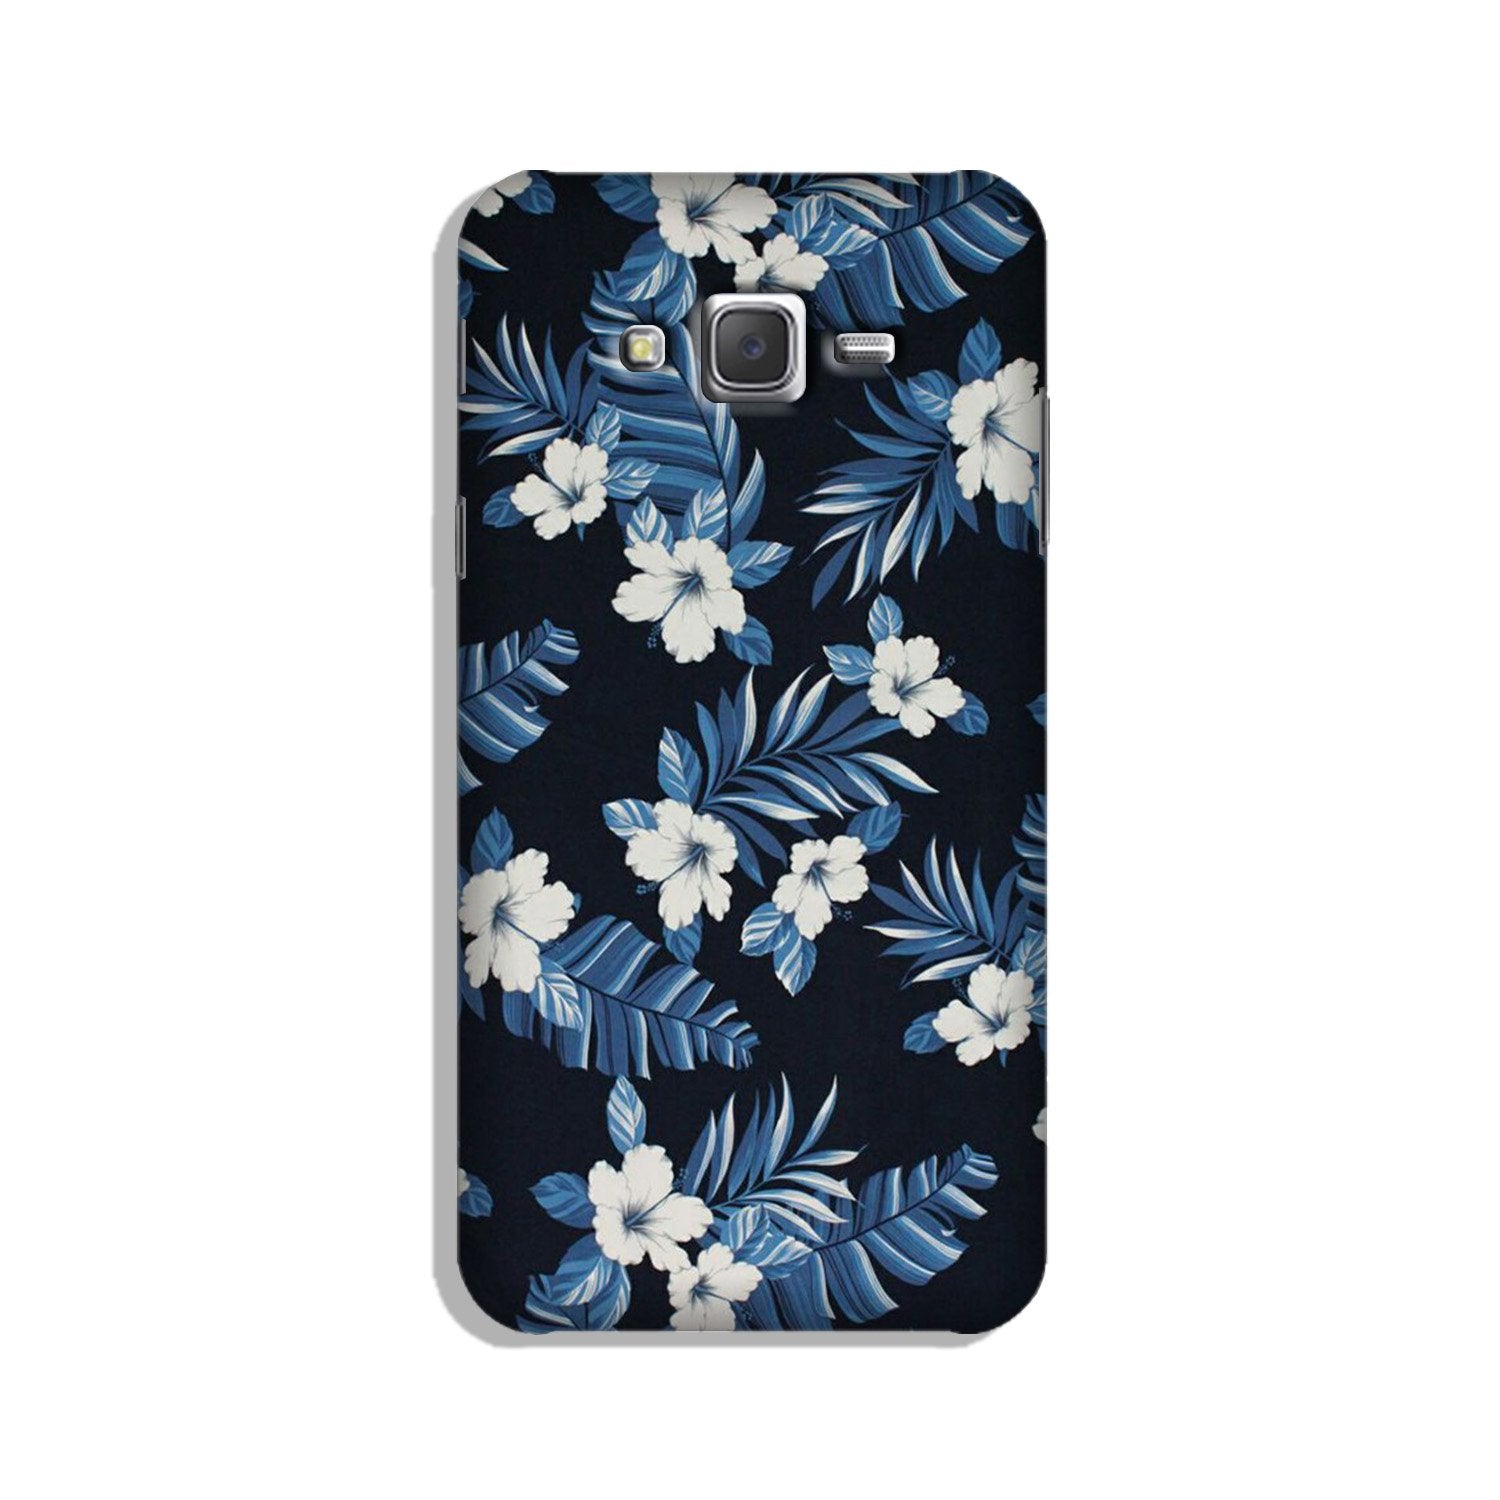 White flowers Blue Background2 Case for Galaxy J7 (2015)